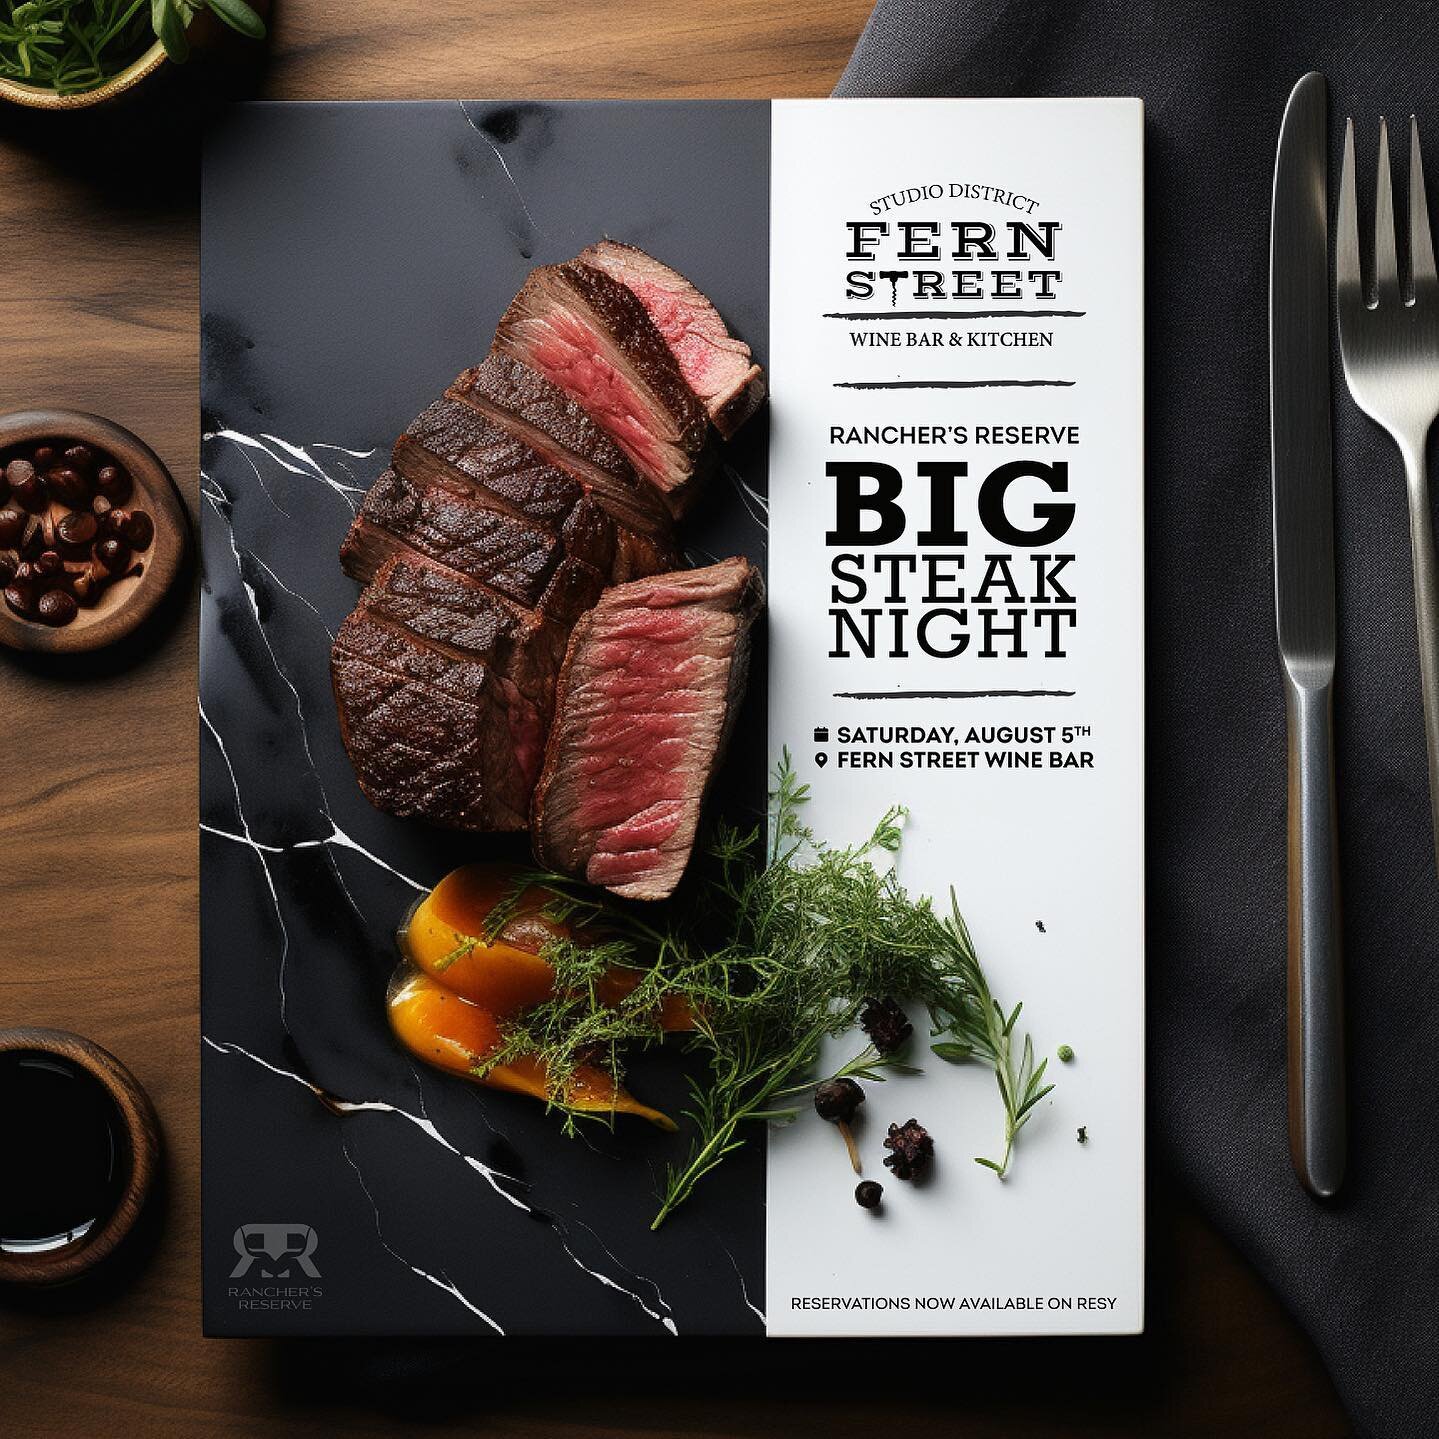 Bring your friends and family Friday, August 5th to share a BIG steak from Rancher's Reserve, and enjoy a true farm to table experience from our ranch to our restaurant!

Fern Street's regular menu will still be available, and we will also be offerin